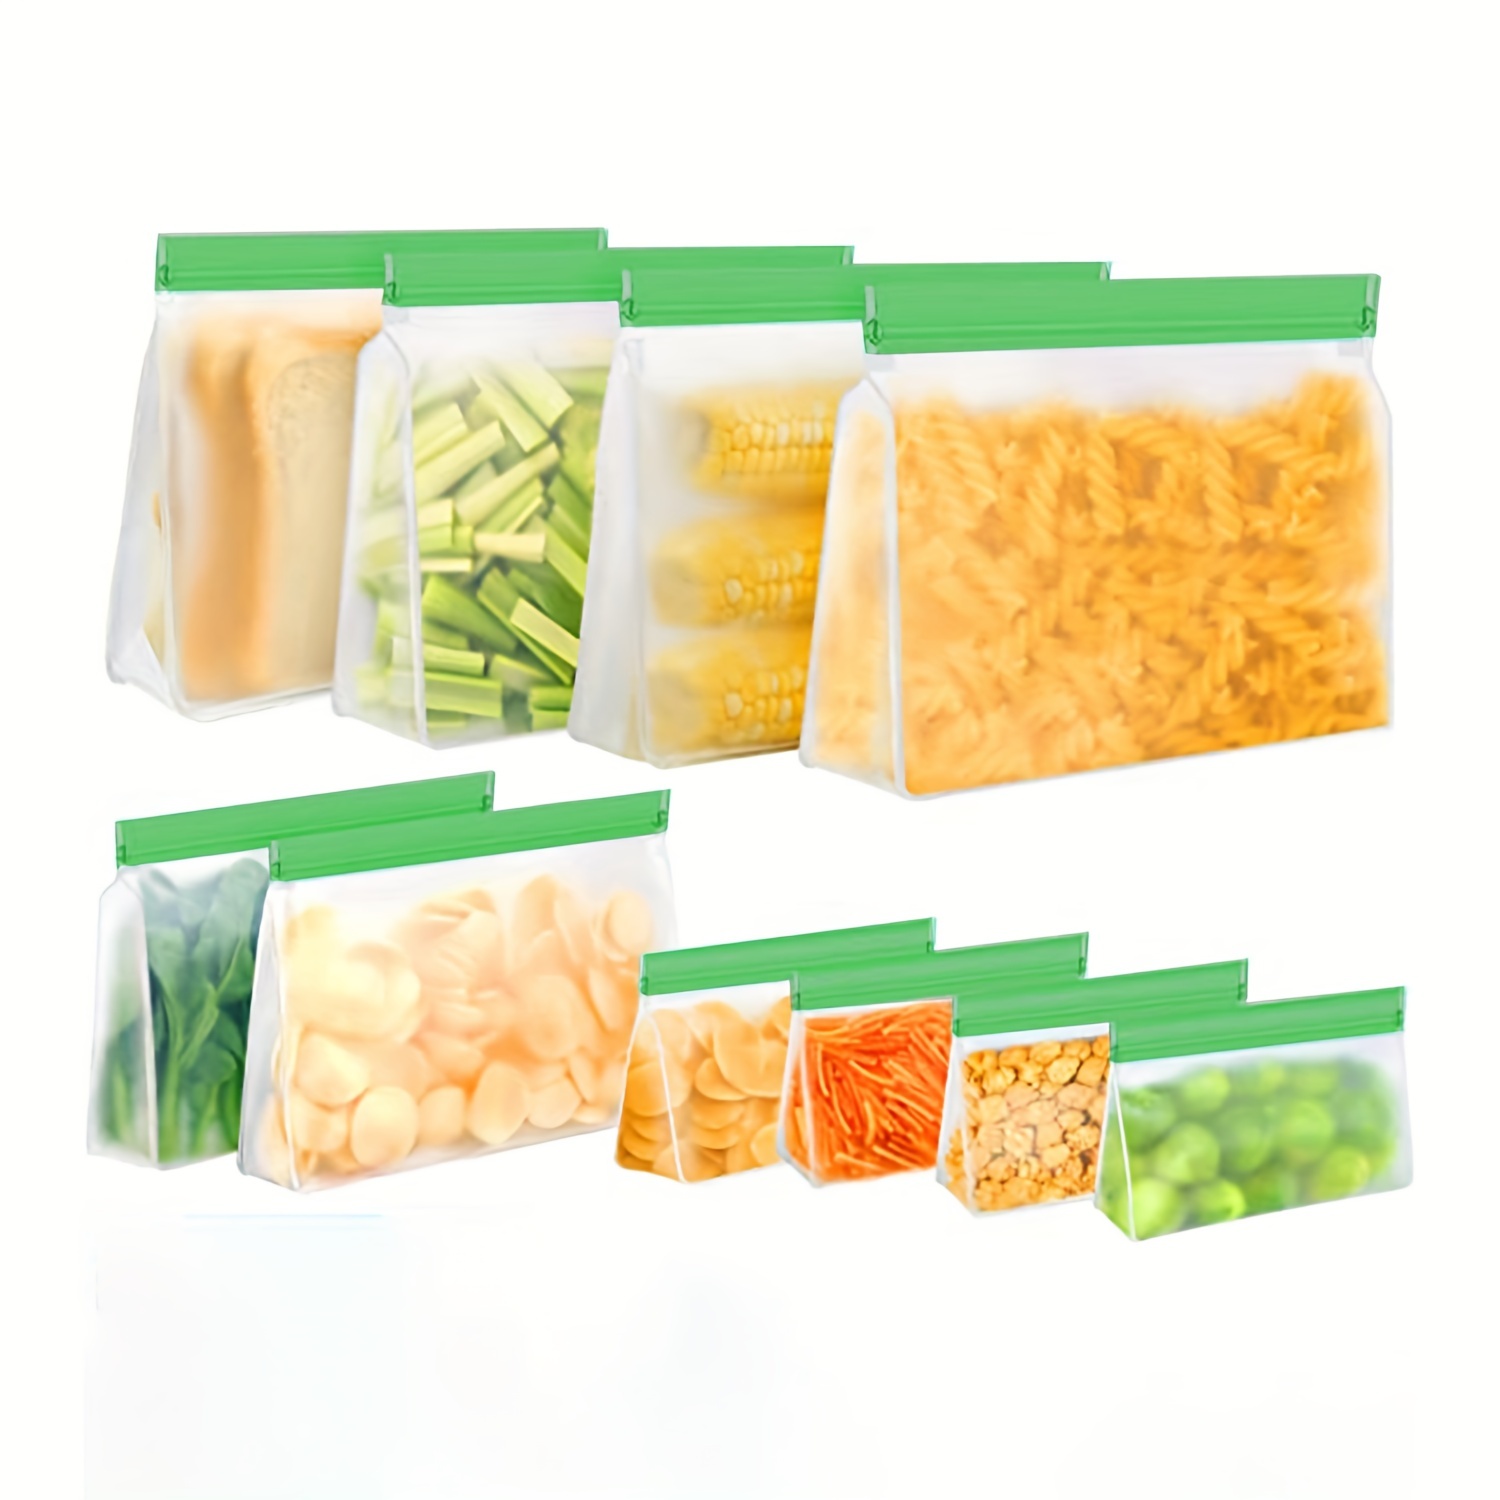 Dropship Green Reusable Food Storage Bags Stand Up - 12 Pack Leakproof Freezer  Bags - 4 Washable Gallon Bags + 4 Reusable Sandwich Bags + 4 Reusable Snack  Bags - Lunch Bags